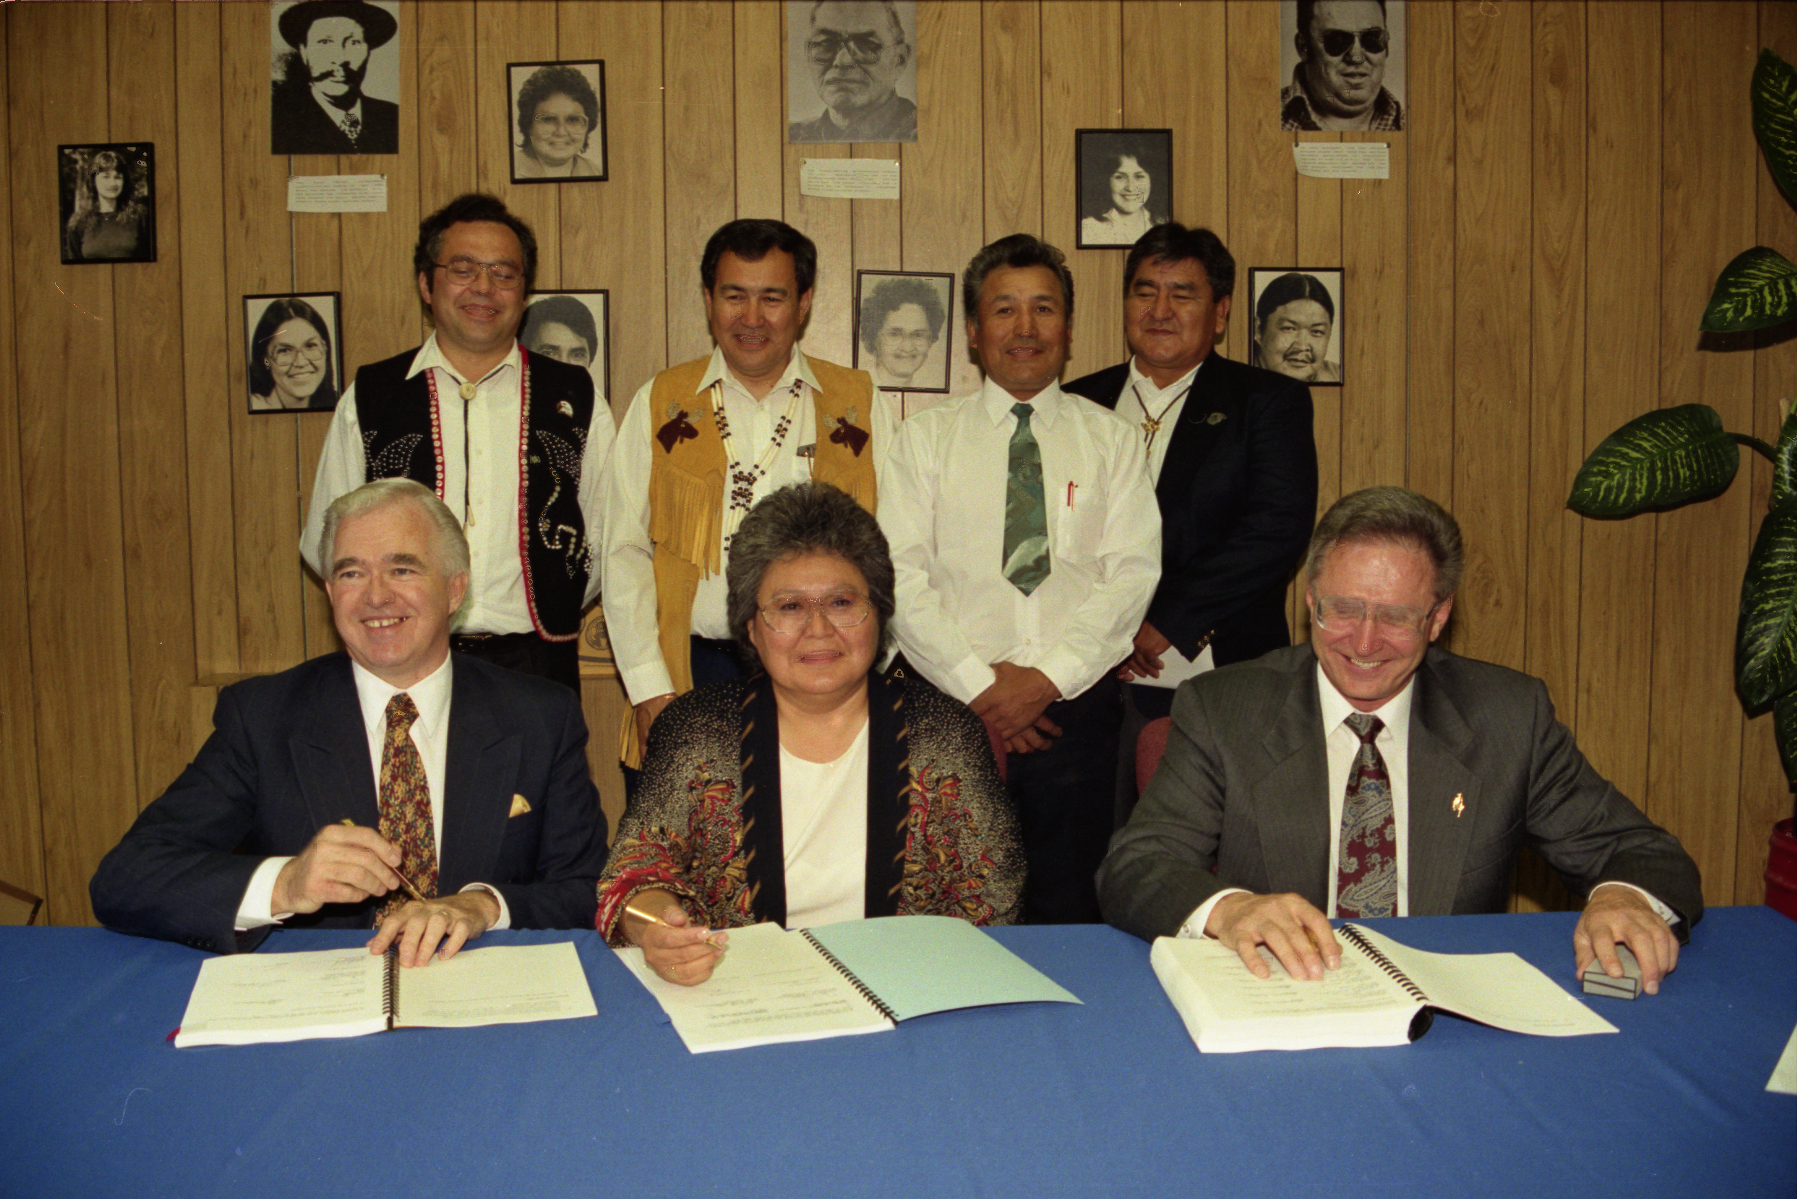 On May 29, 1993, the Umbrella Final Agreement was signed by the Government of Canada, the Government of Yukon and the Council of Yukon First Nations.